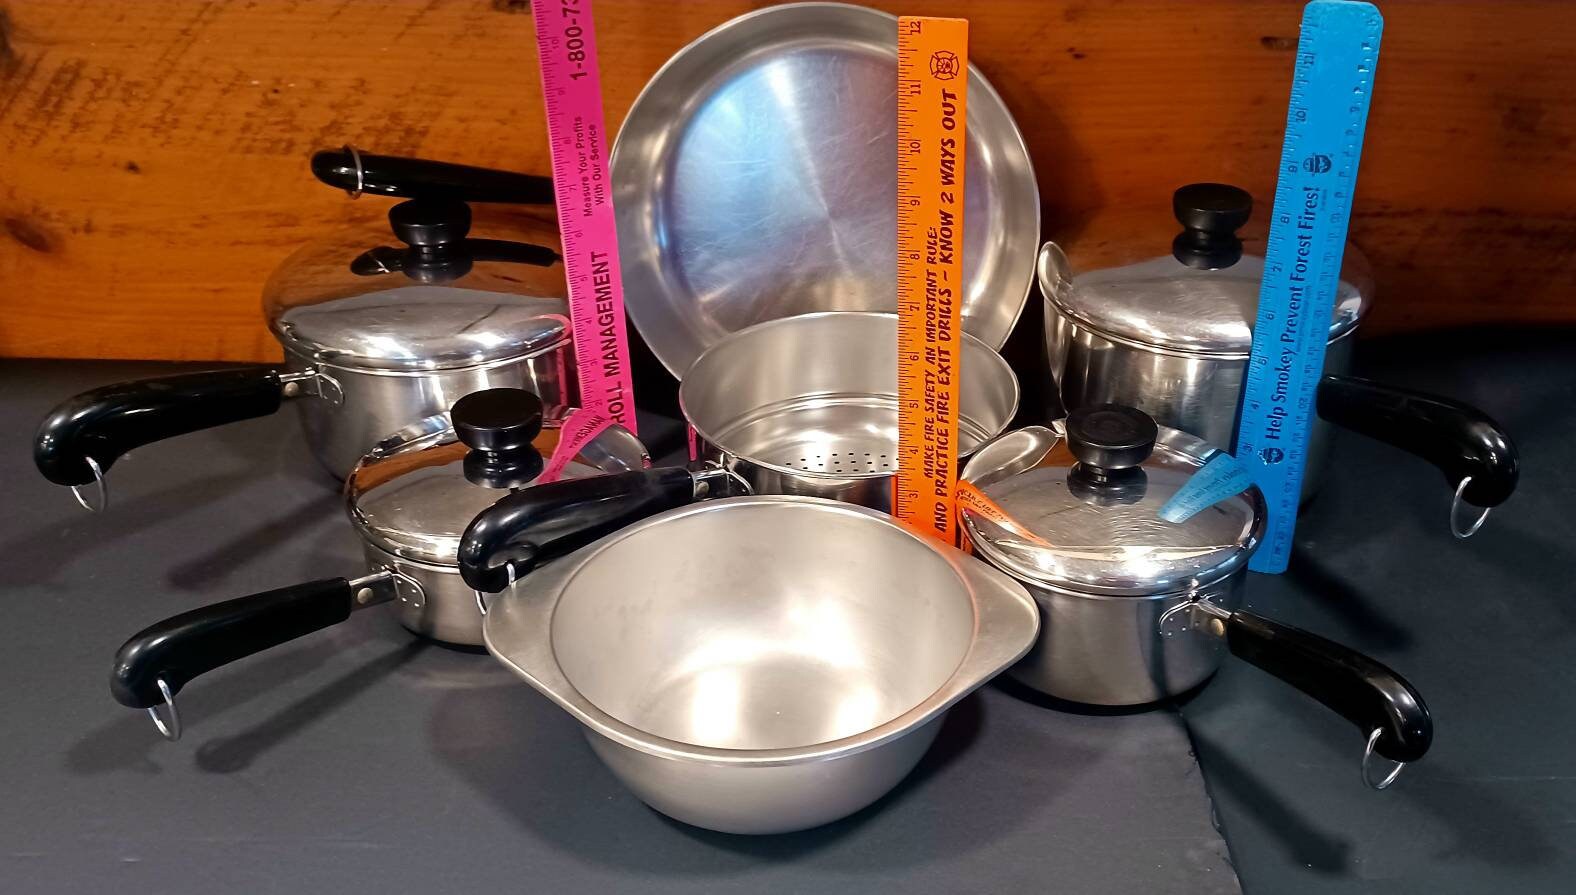 Set of 6 never used 1801 Paul Revere Copper and Stainless Steel pots and  pans - Cookware - Souderton, Pennsylvania, Facebook Marketplace